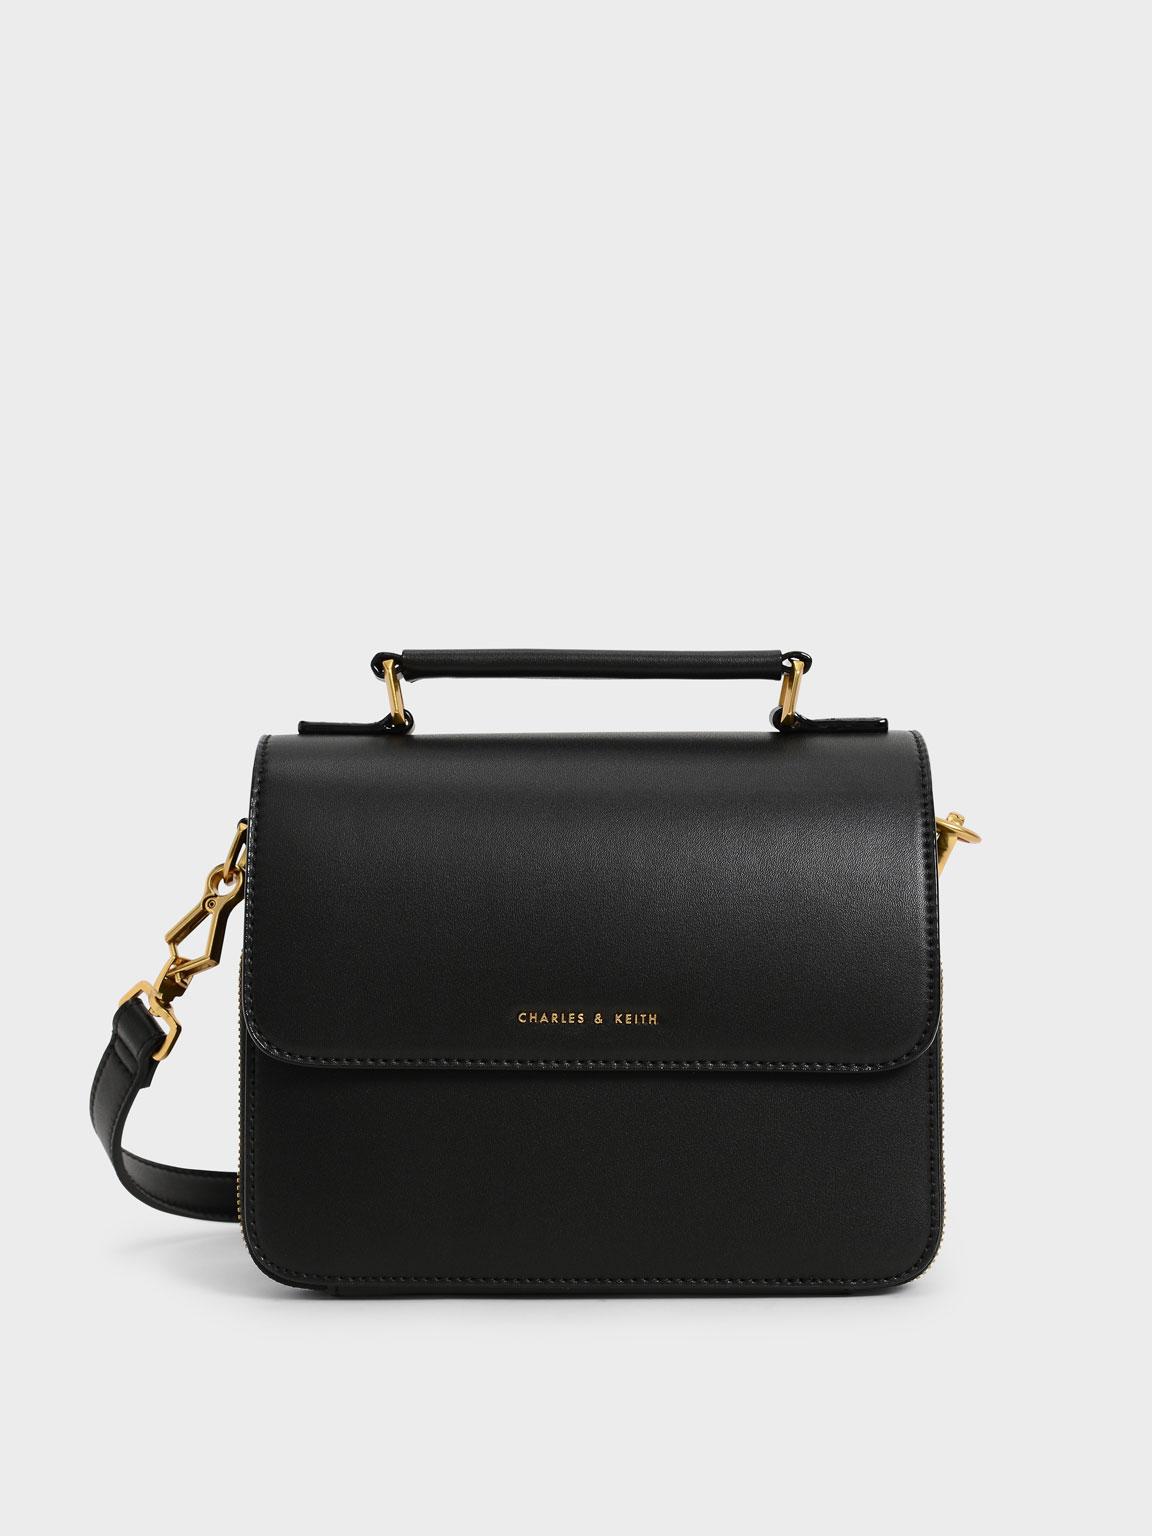 Charles & Keith Front Flap Top Handle Crossbody Bag in Black | Lyst